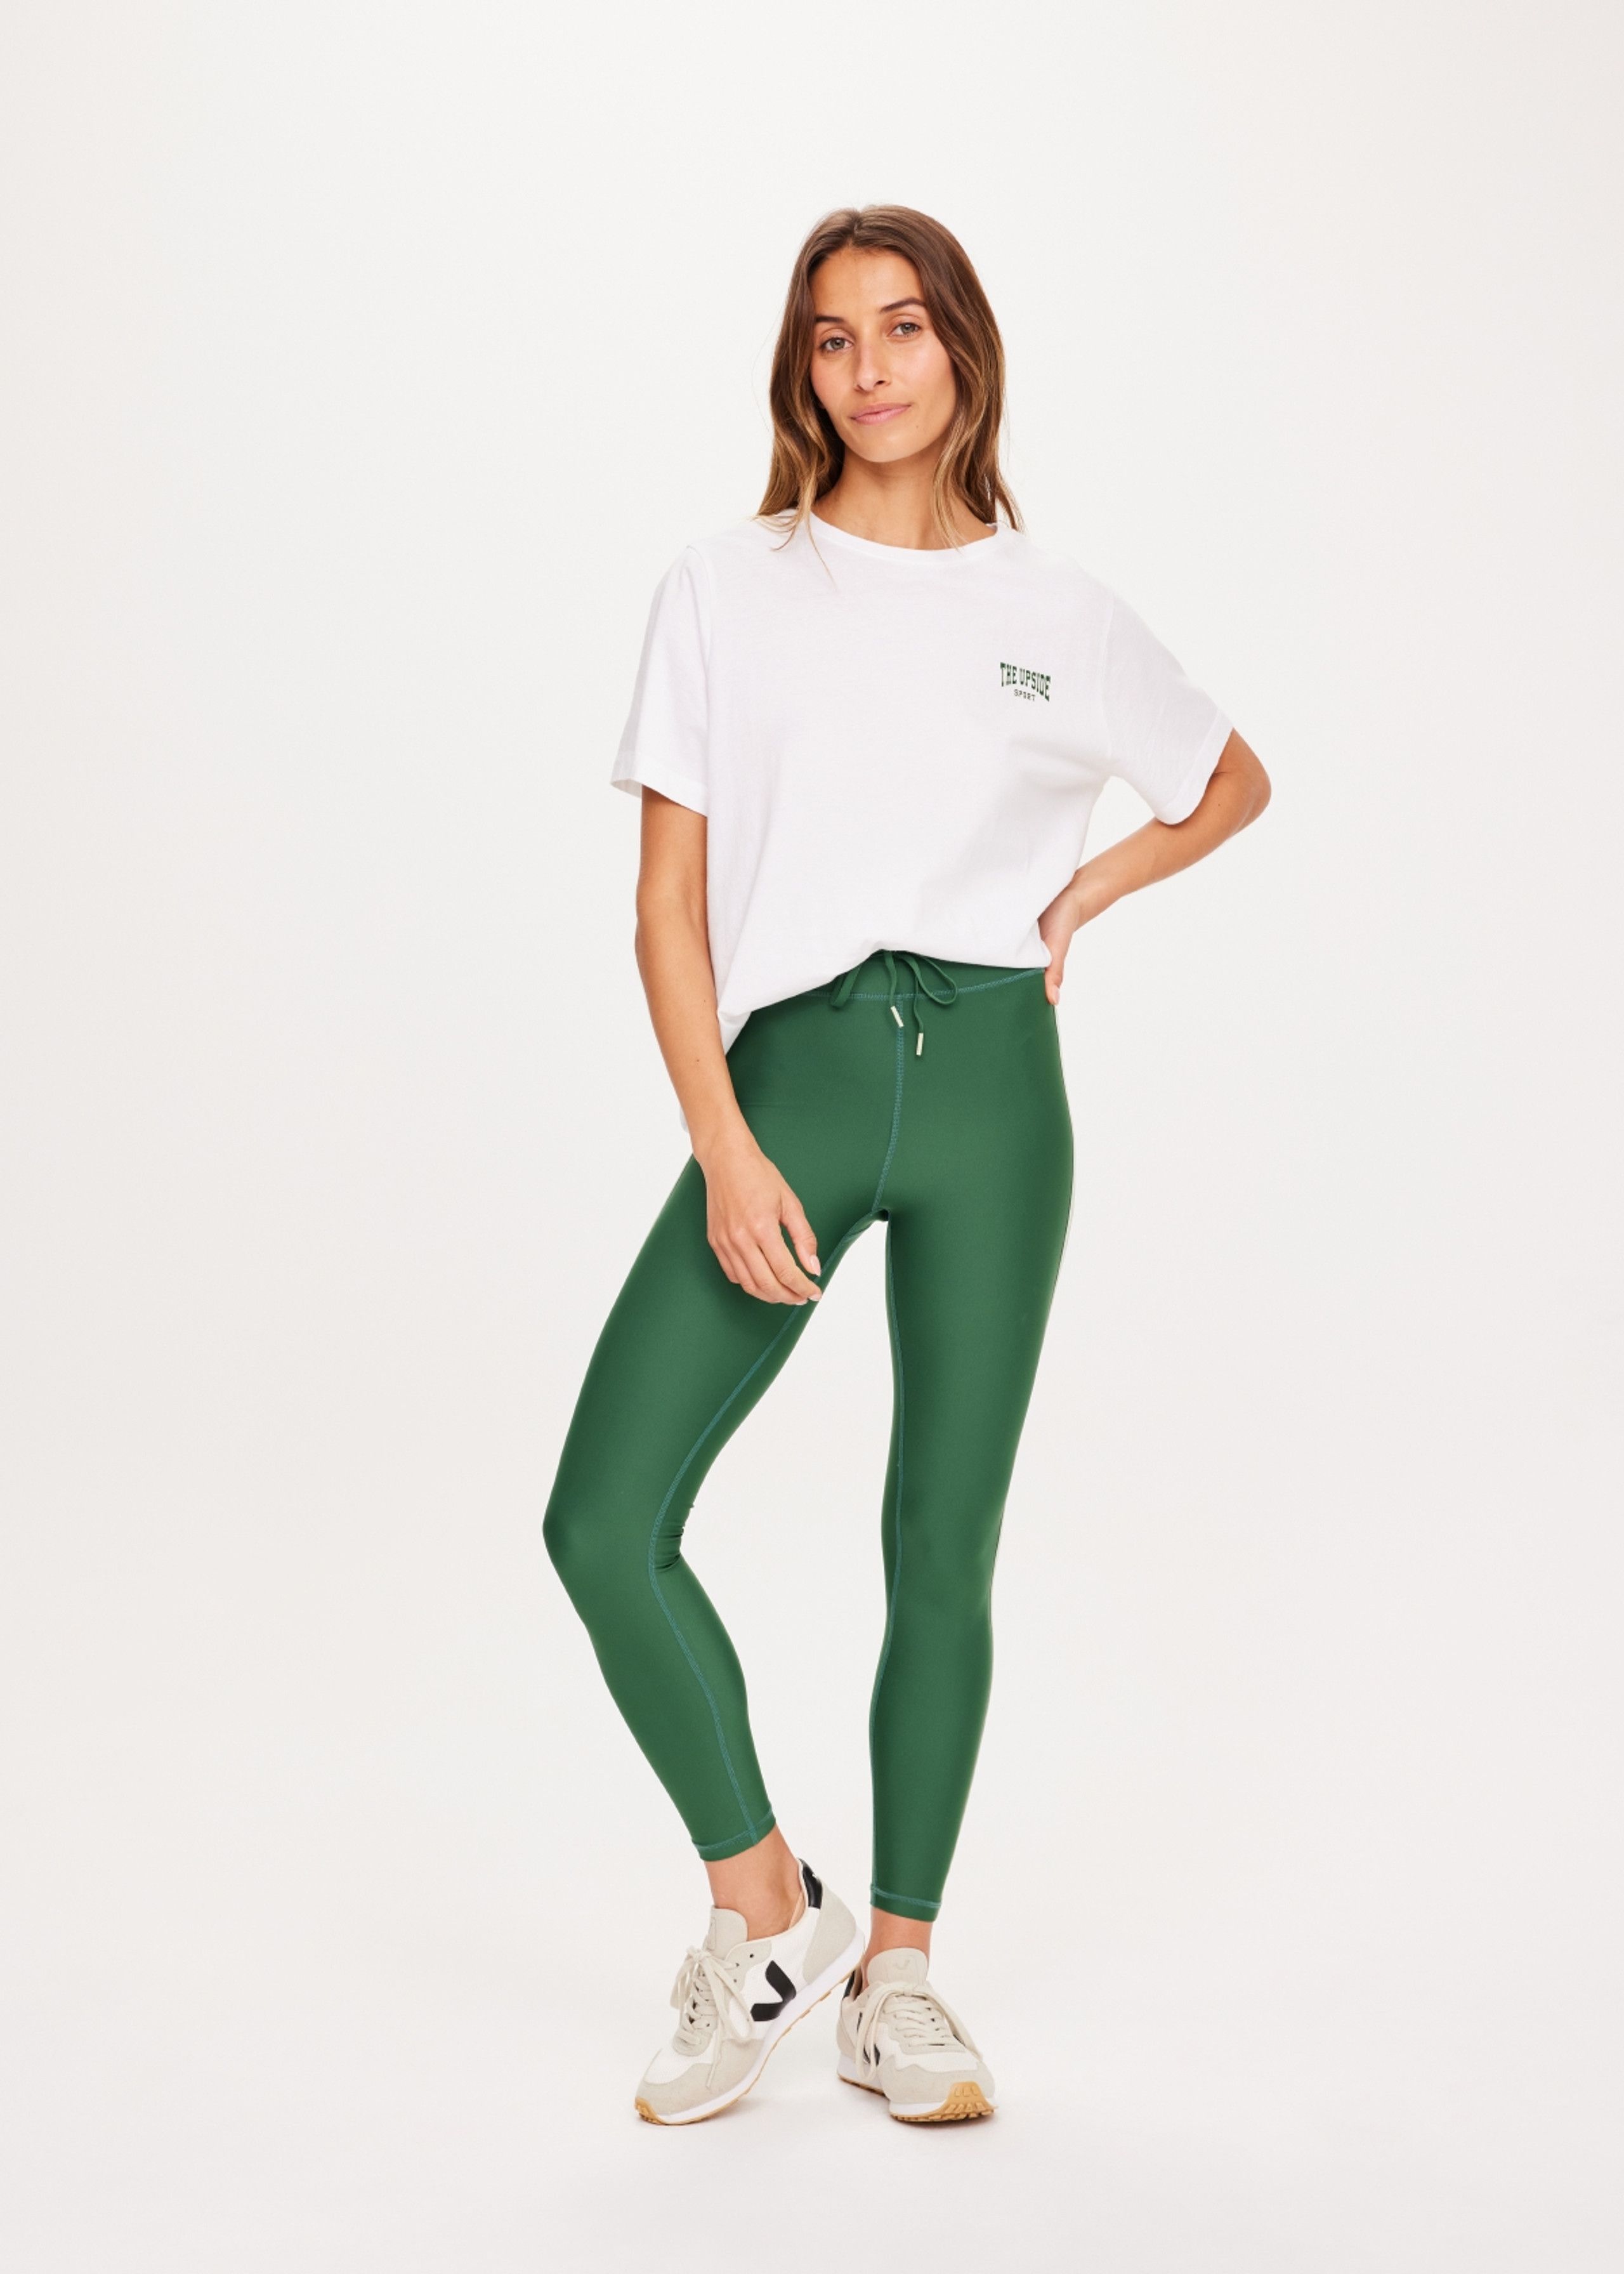 OXFORD 25IN MIDI PANT in FERN | The UPSIDE | The Upside US